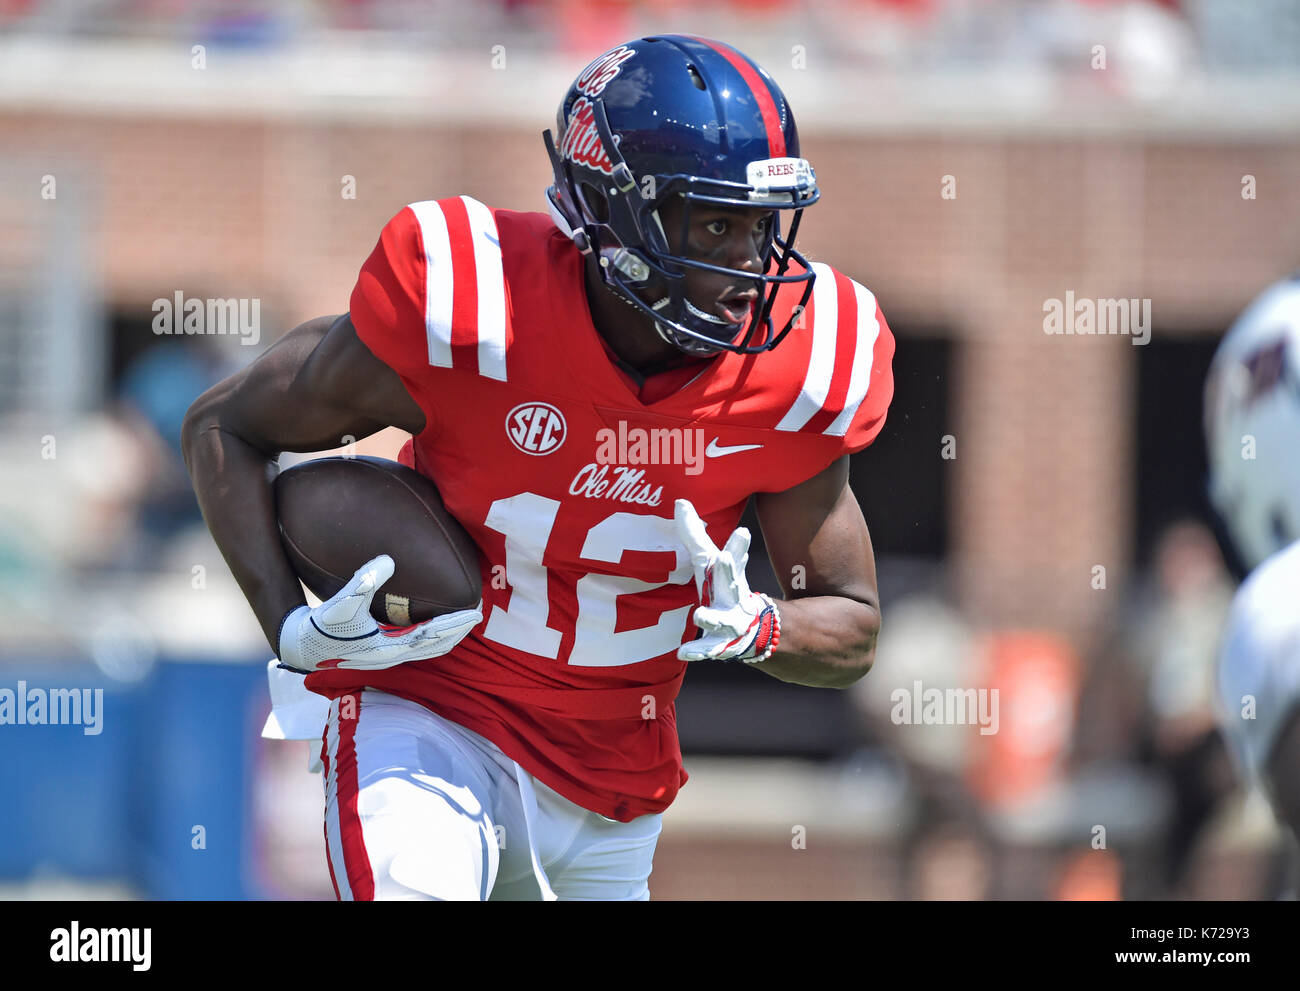 Oxford, MS, USA. 9th Sep, 2017. Mississippi receiver Van Jefferson turns upfield during the fourth quarter of a NCAA college football game against Tennessee-Martin at Vaught-Hemmingway Stadium in Oxford, MS. Mississippi won 45-23. Austin McAfee/CSM/Alamy Live News Stock Photo